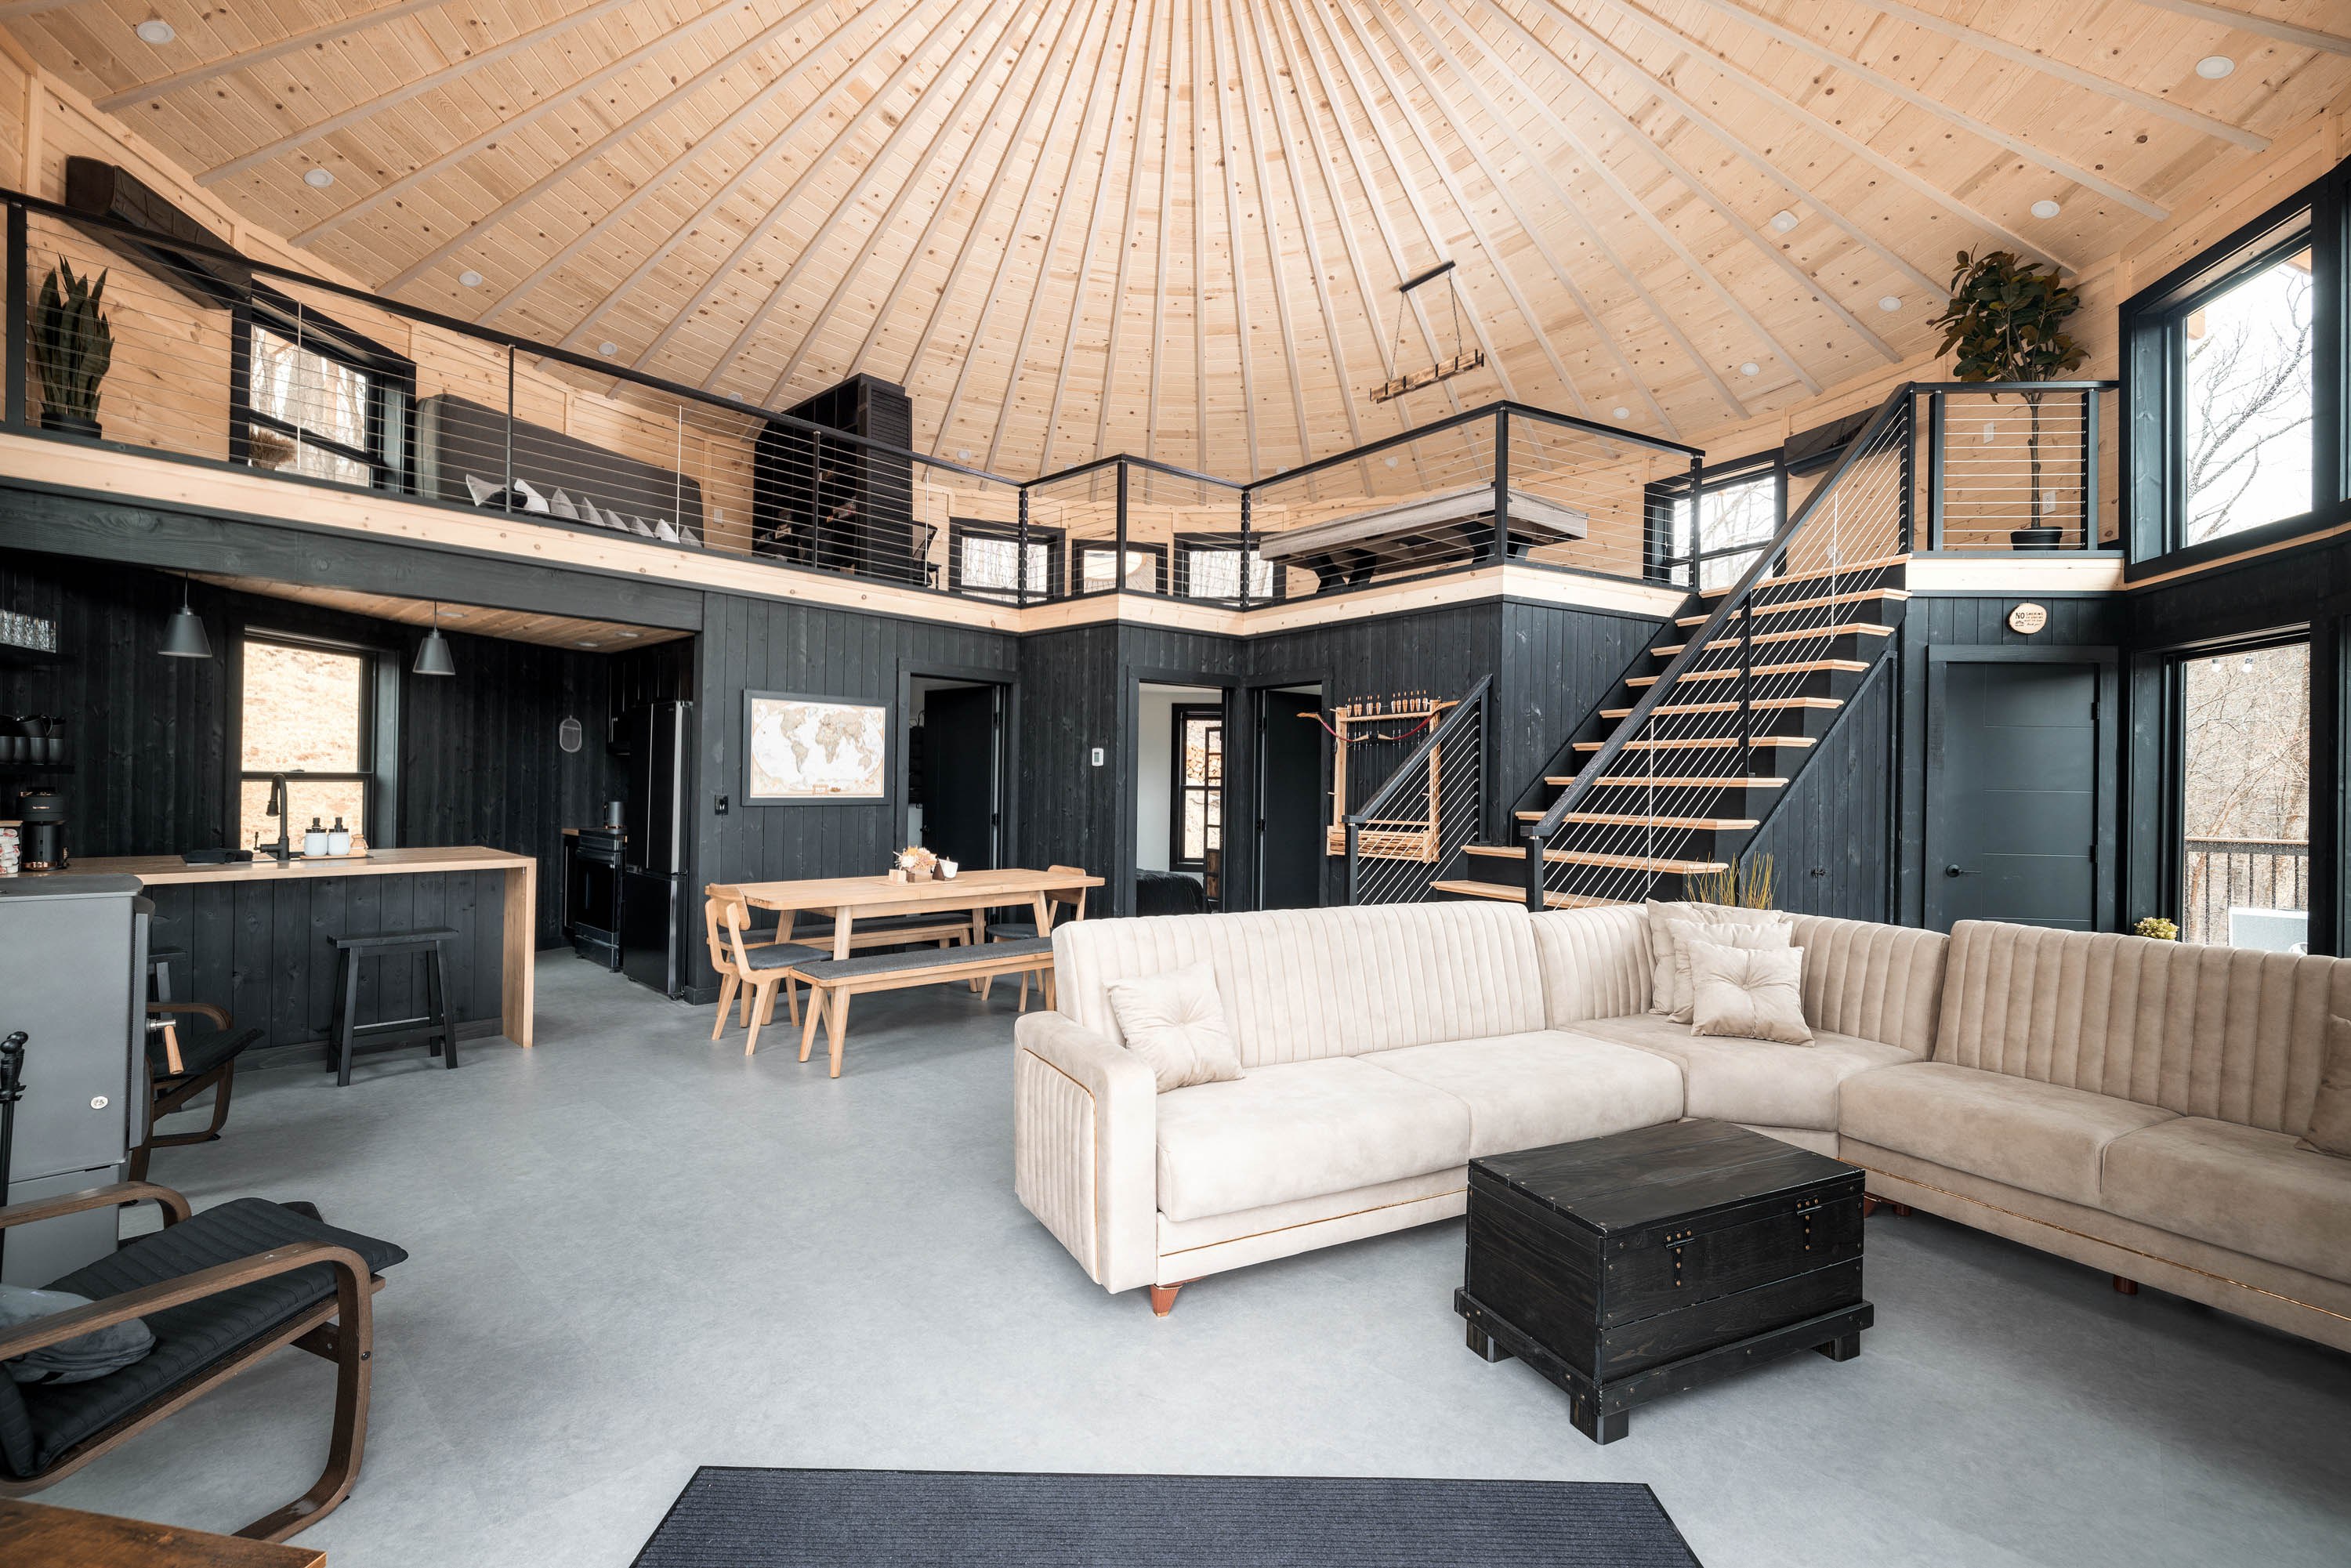 <span  class="uc_style_uc_tiles_grid_image_elementor_uc_items_attribute_title" style="color:#ffffff;">Large Living Area with Wood Stove, Loft, Dining Table for 8, Full Kitchen, Lounge Chairs, Archery Set - Skyline Yurt</span>